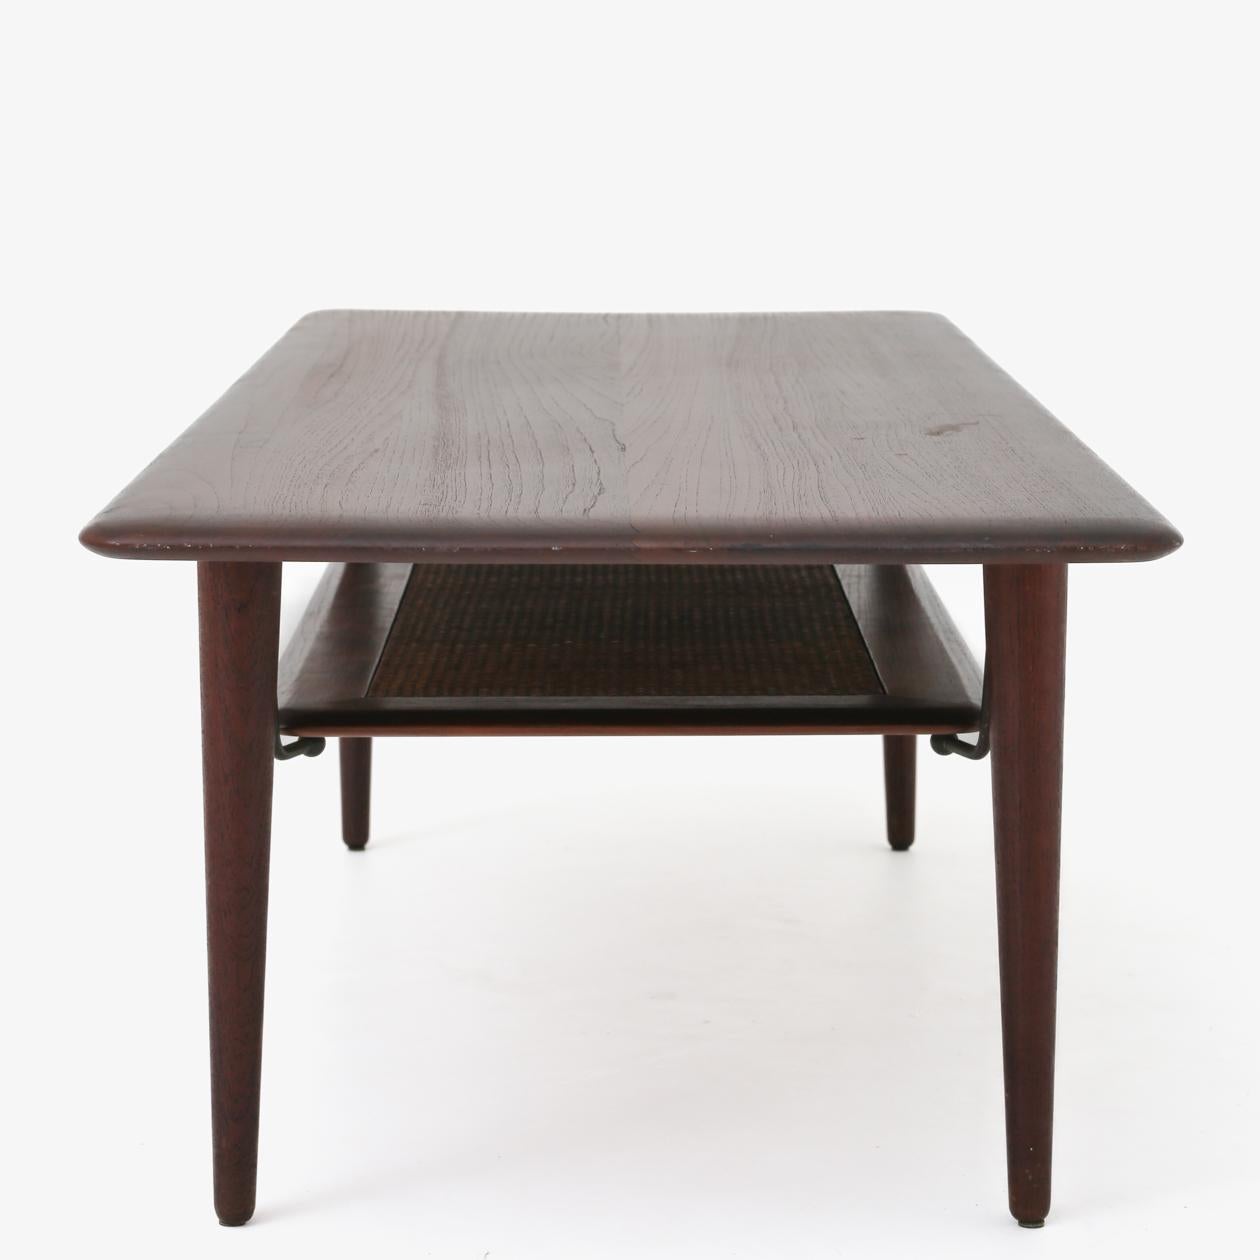 Coffee table with solid teak top and underlying shelf in cane. Peter Hvidt & Orla Mølgaard / France & Son.